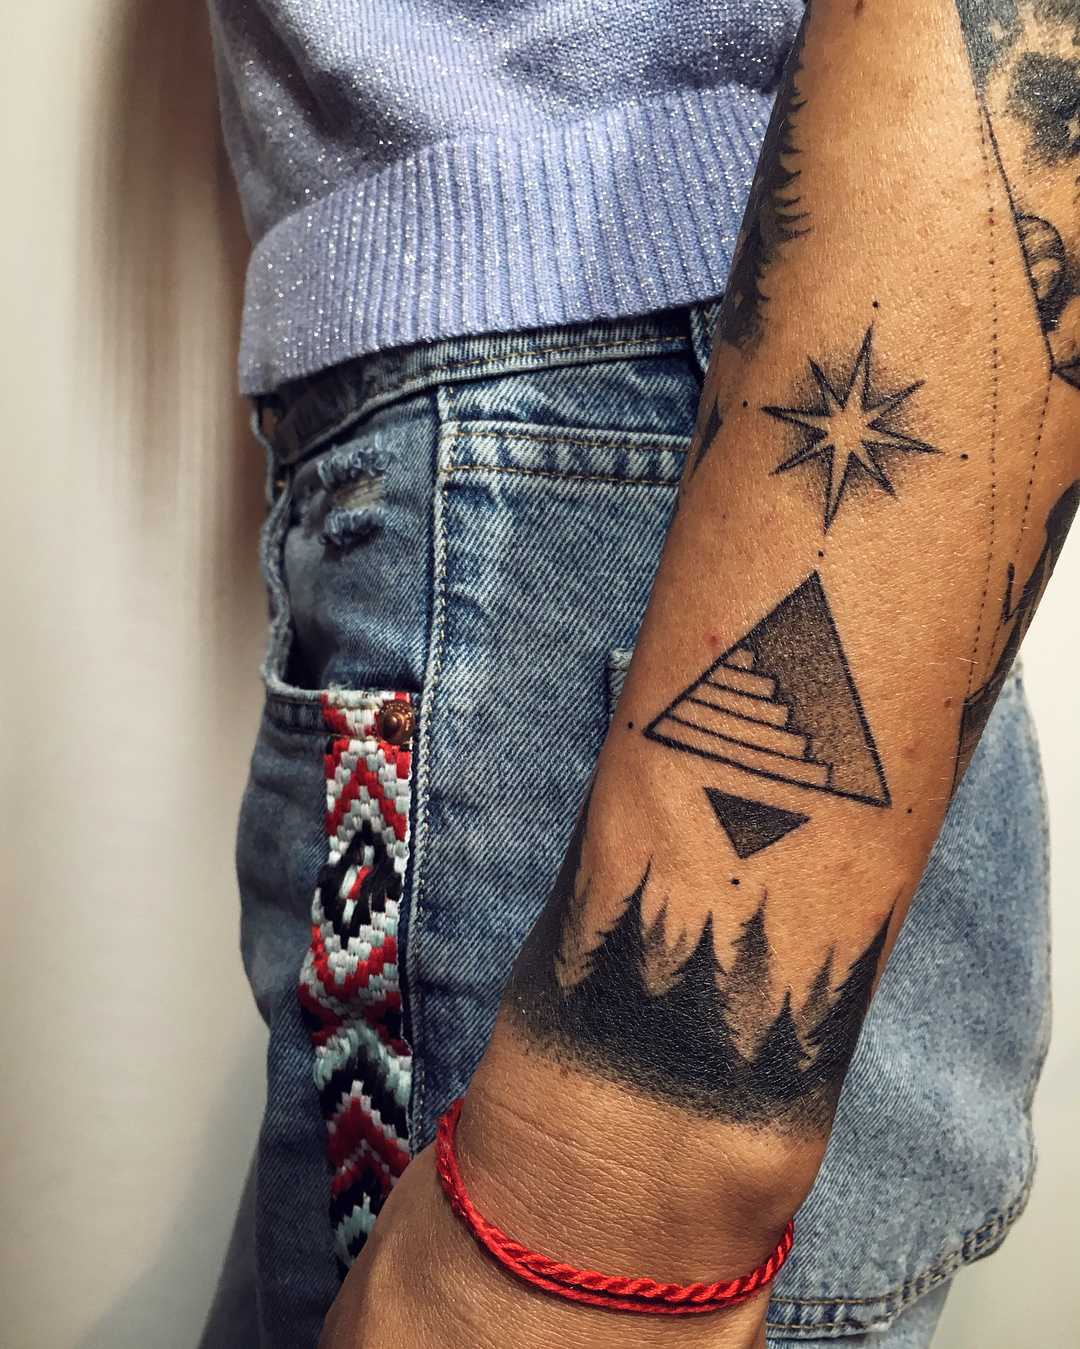 North star, stairway and forest tattoo by Sasha Kiseleva